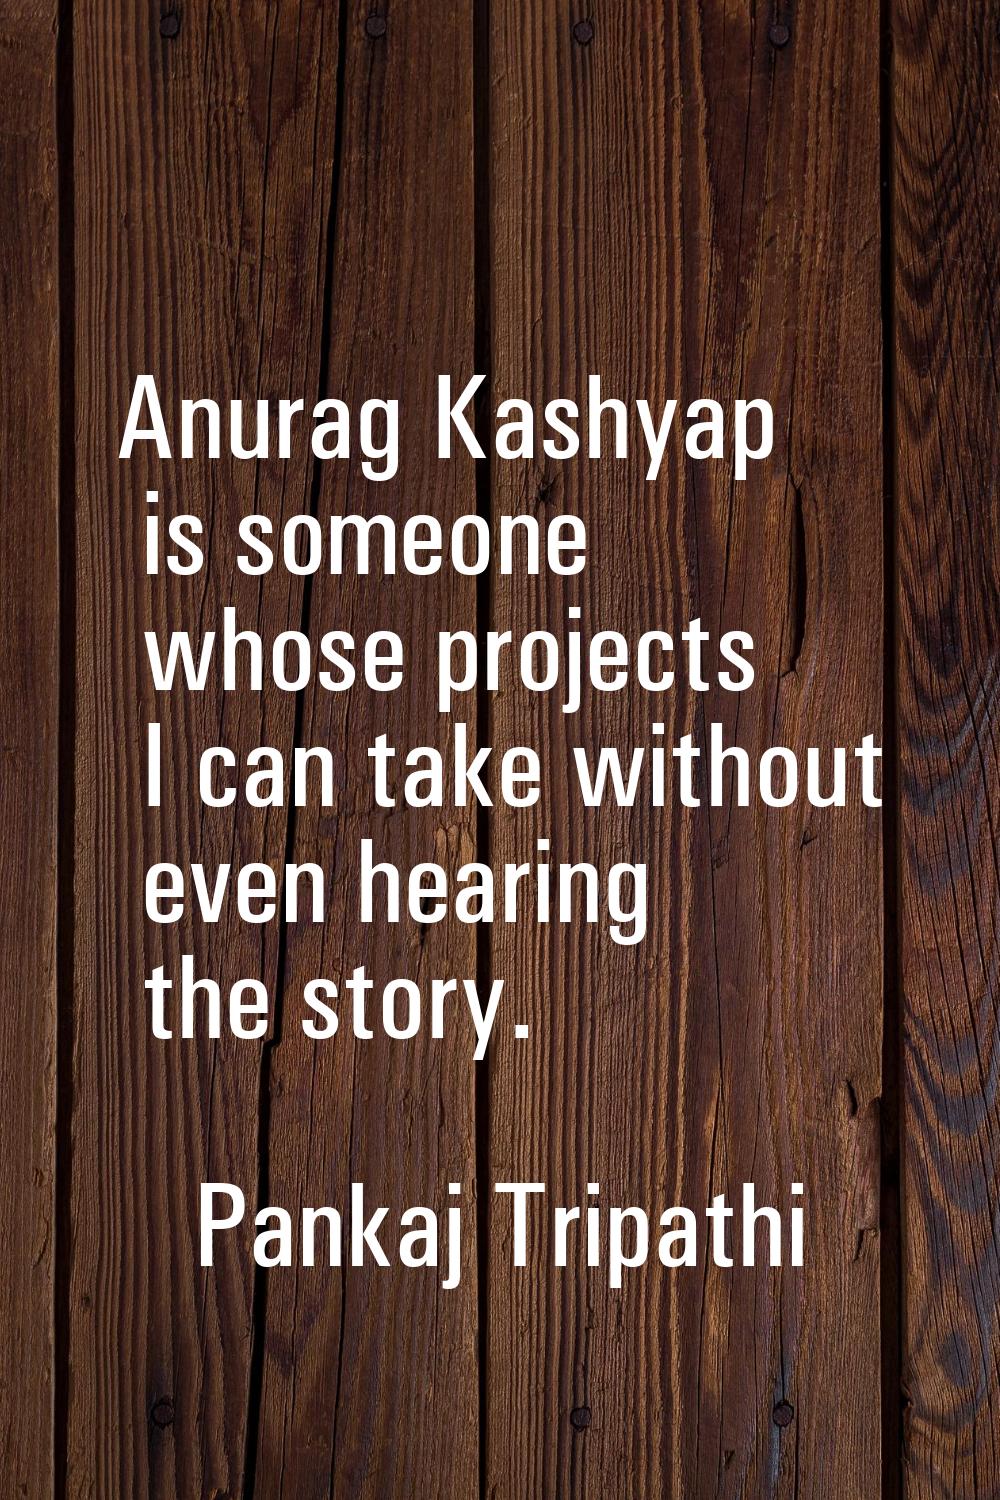 Anurag Kashyap is someone whose projects I can take without even hearing the story.